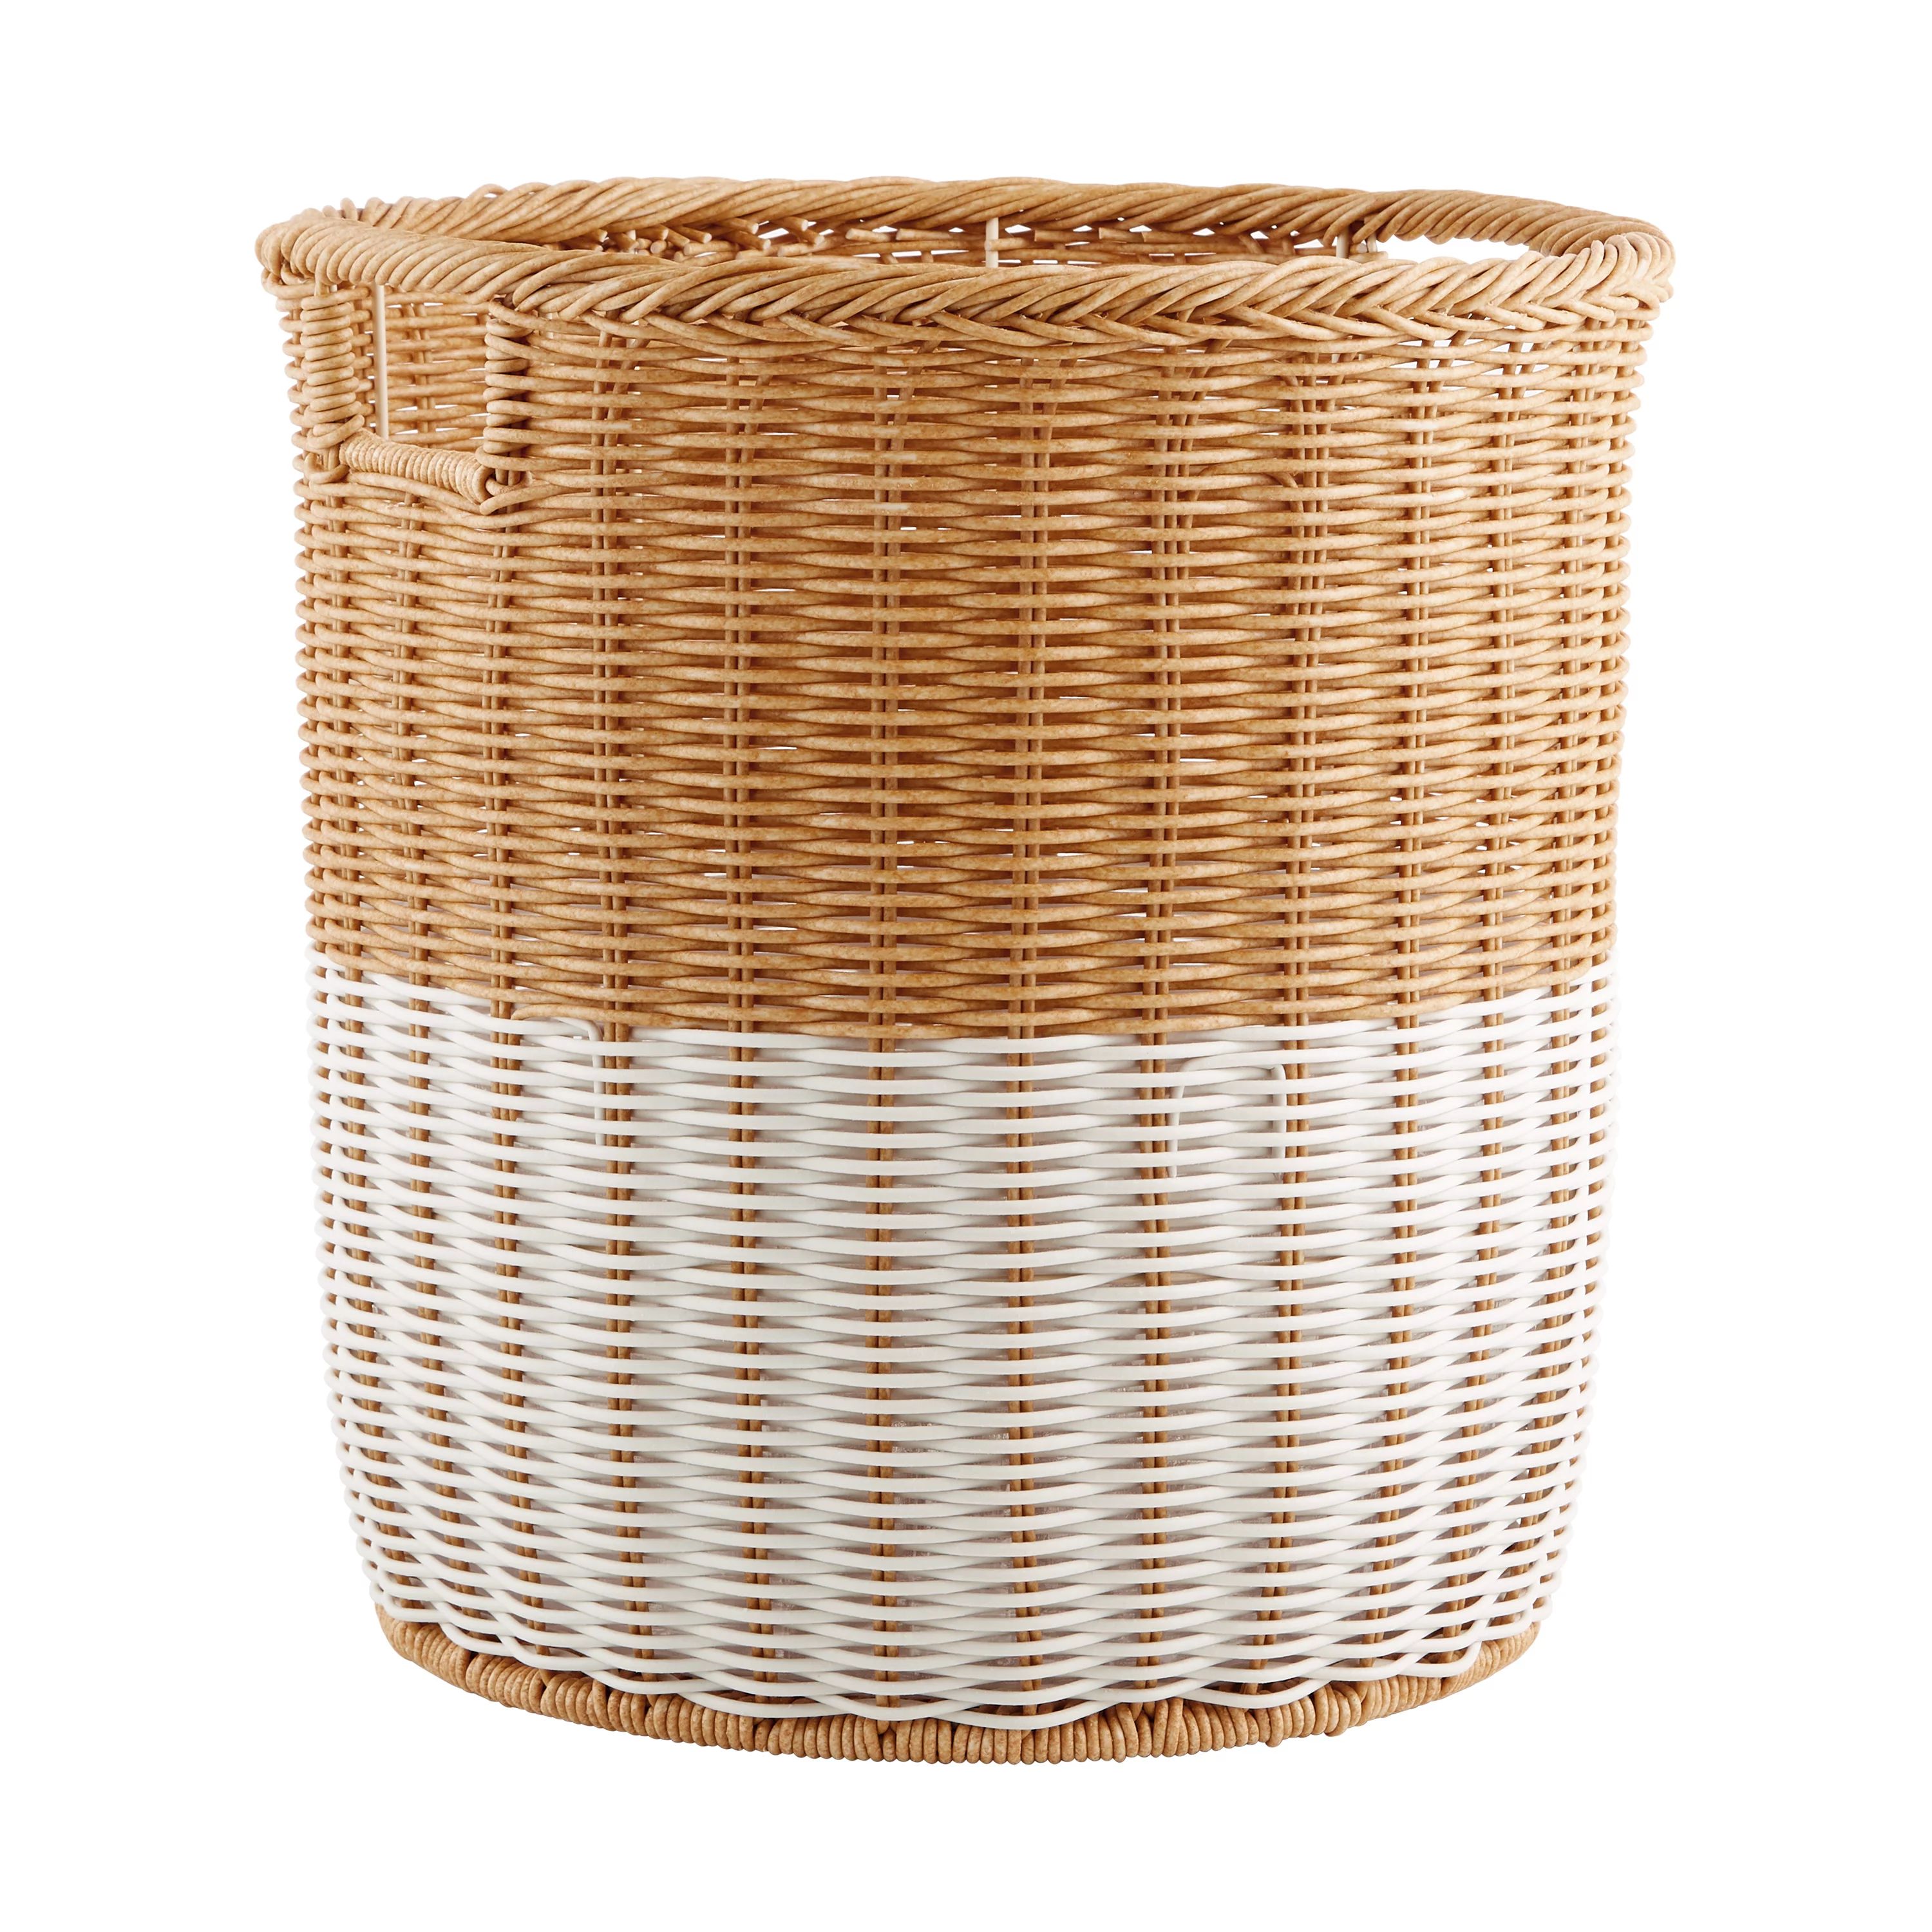 Better Homes & Gardens Large Woven Resin Wicker Planter by Dave & Jenny Marrs | Walmart (US)